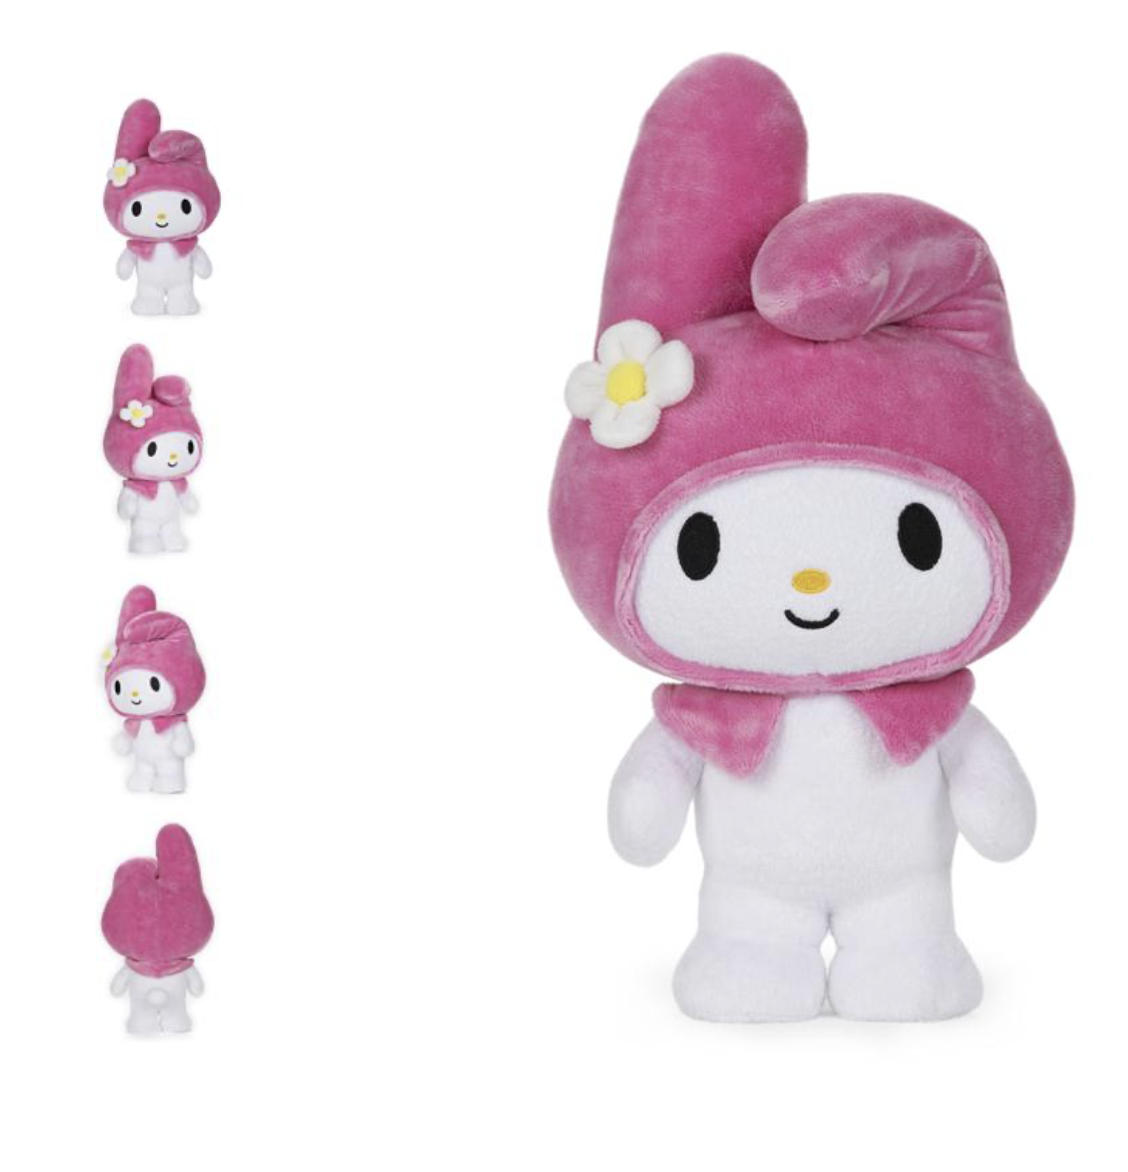 MY MELODY, 9.5 IN